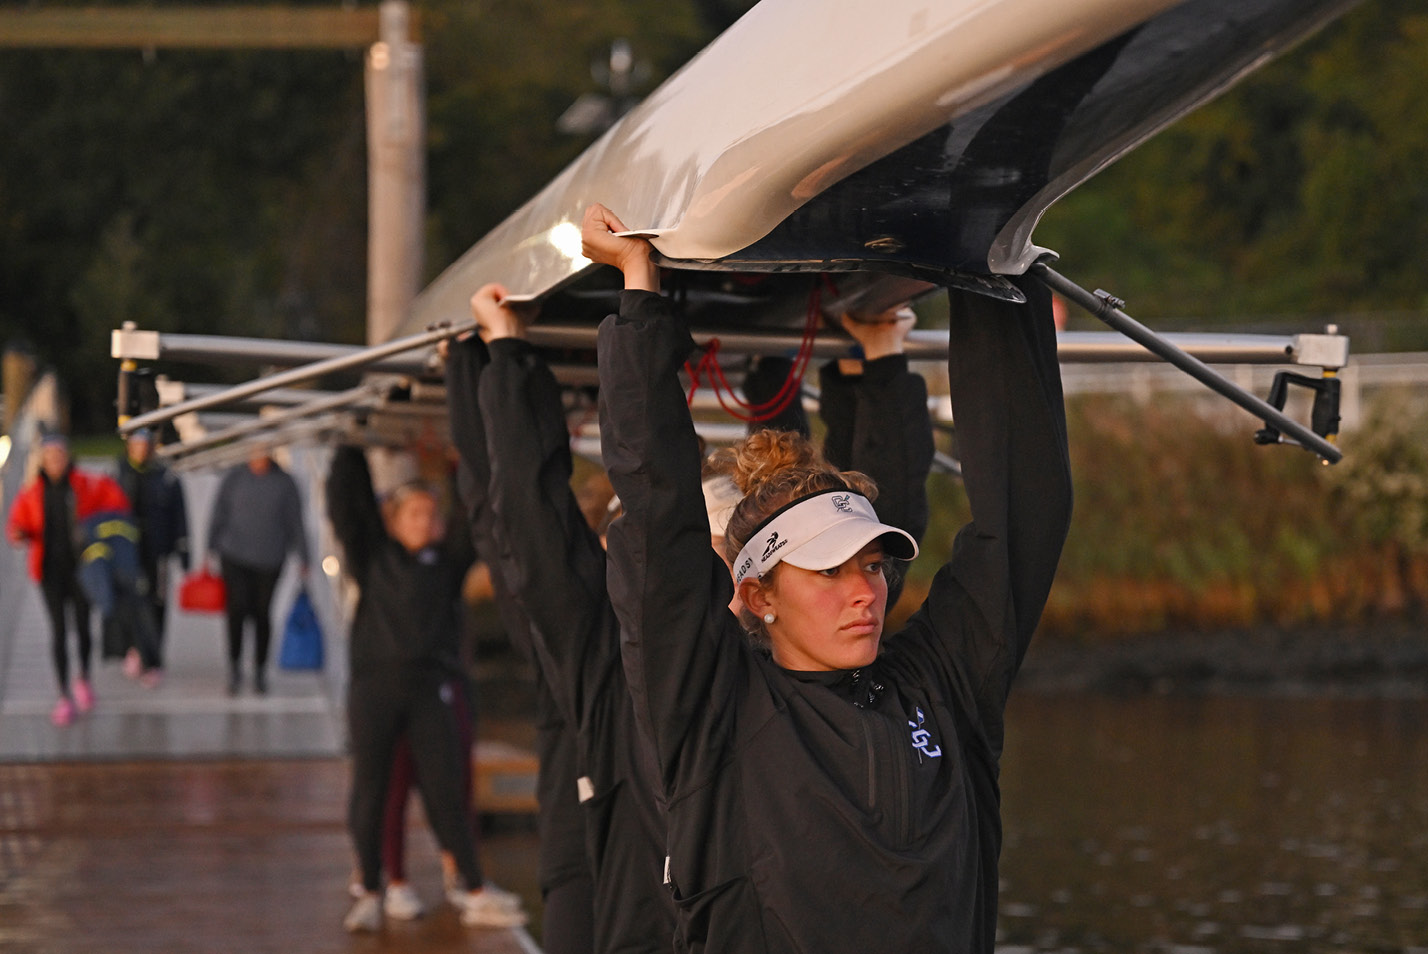 Womens crew hauls boats on the Thames River at dawn in October.